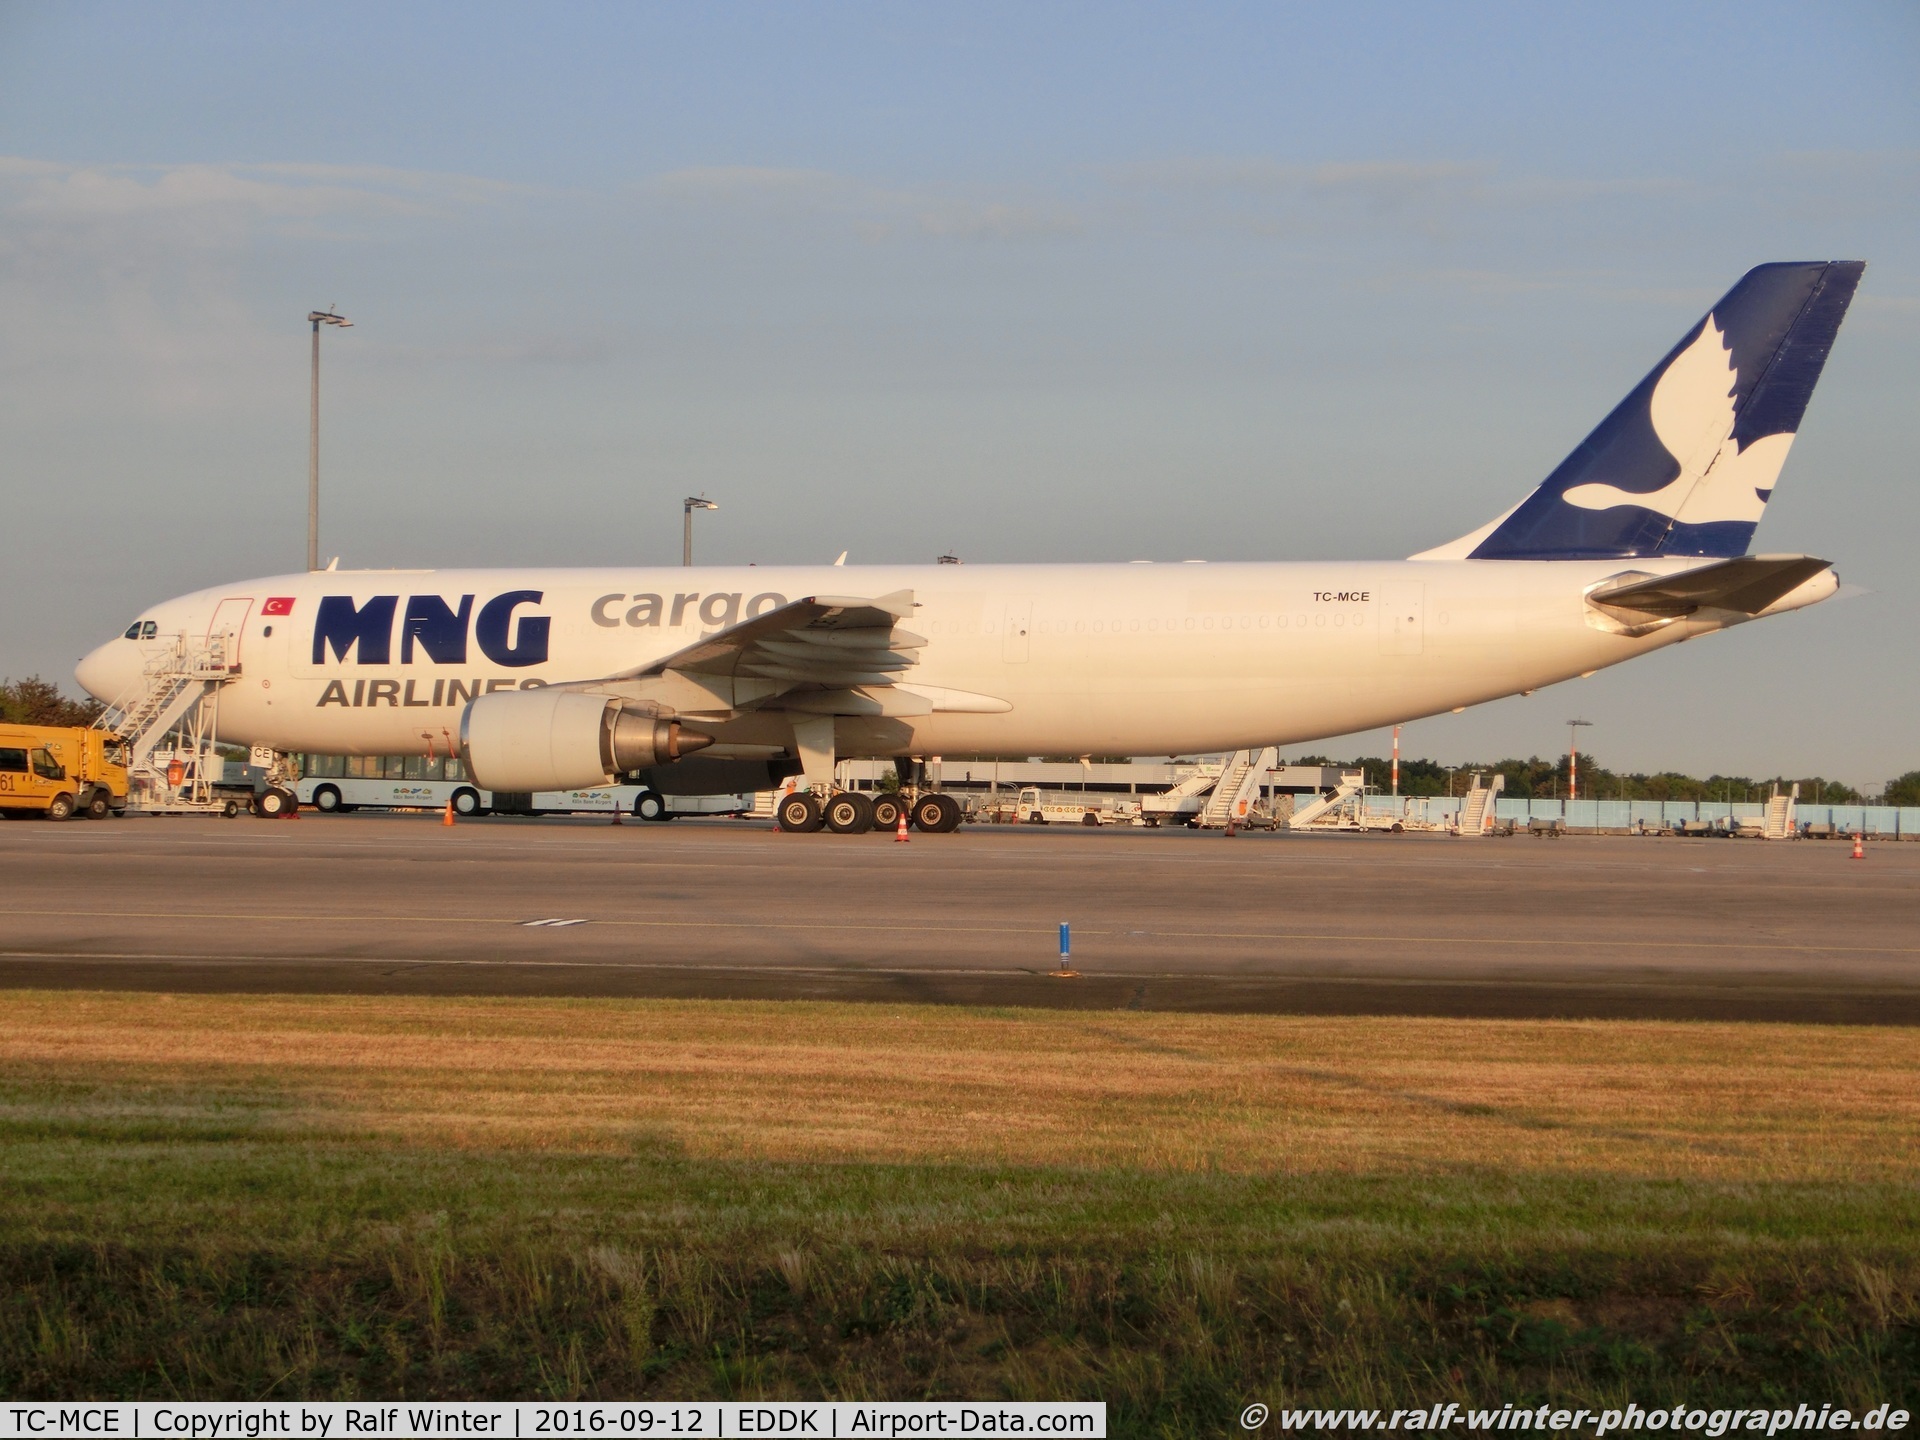 TC-MCE, 1989 Airbus A300B4-605R(F) C/N 525, Airbus A-300B4-605RF - MB MNB MNG Airlines - 525 - TC-MCE - 12.09.2016 - CGN